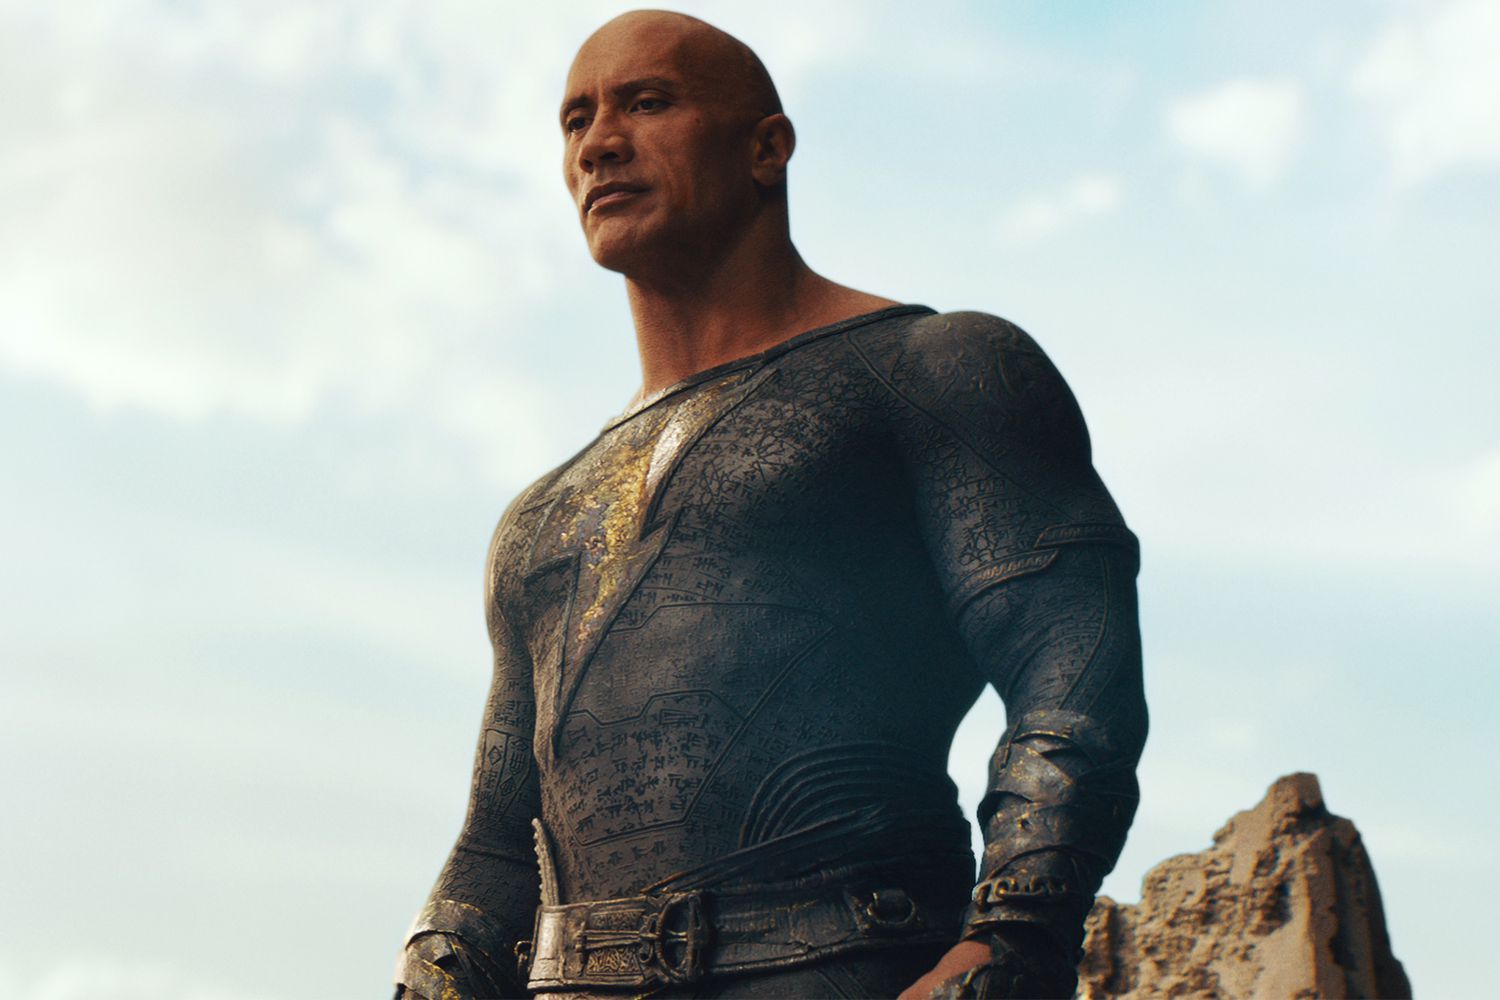 BLACK ADAM Copyright: © 2022 Warner Bros. Entertainment Inc. All Rights Reserved. Photo Credit: Courtesy Warner Bros. Pictures Caption: DWAYNE JOHNSON on the set of New Line Cinema’s action adventure “BLACK ADAM,” a Warner Bros. Pictures release.